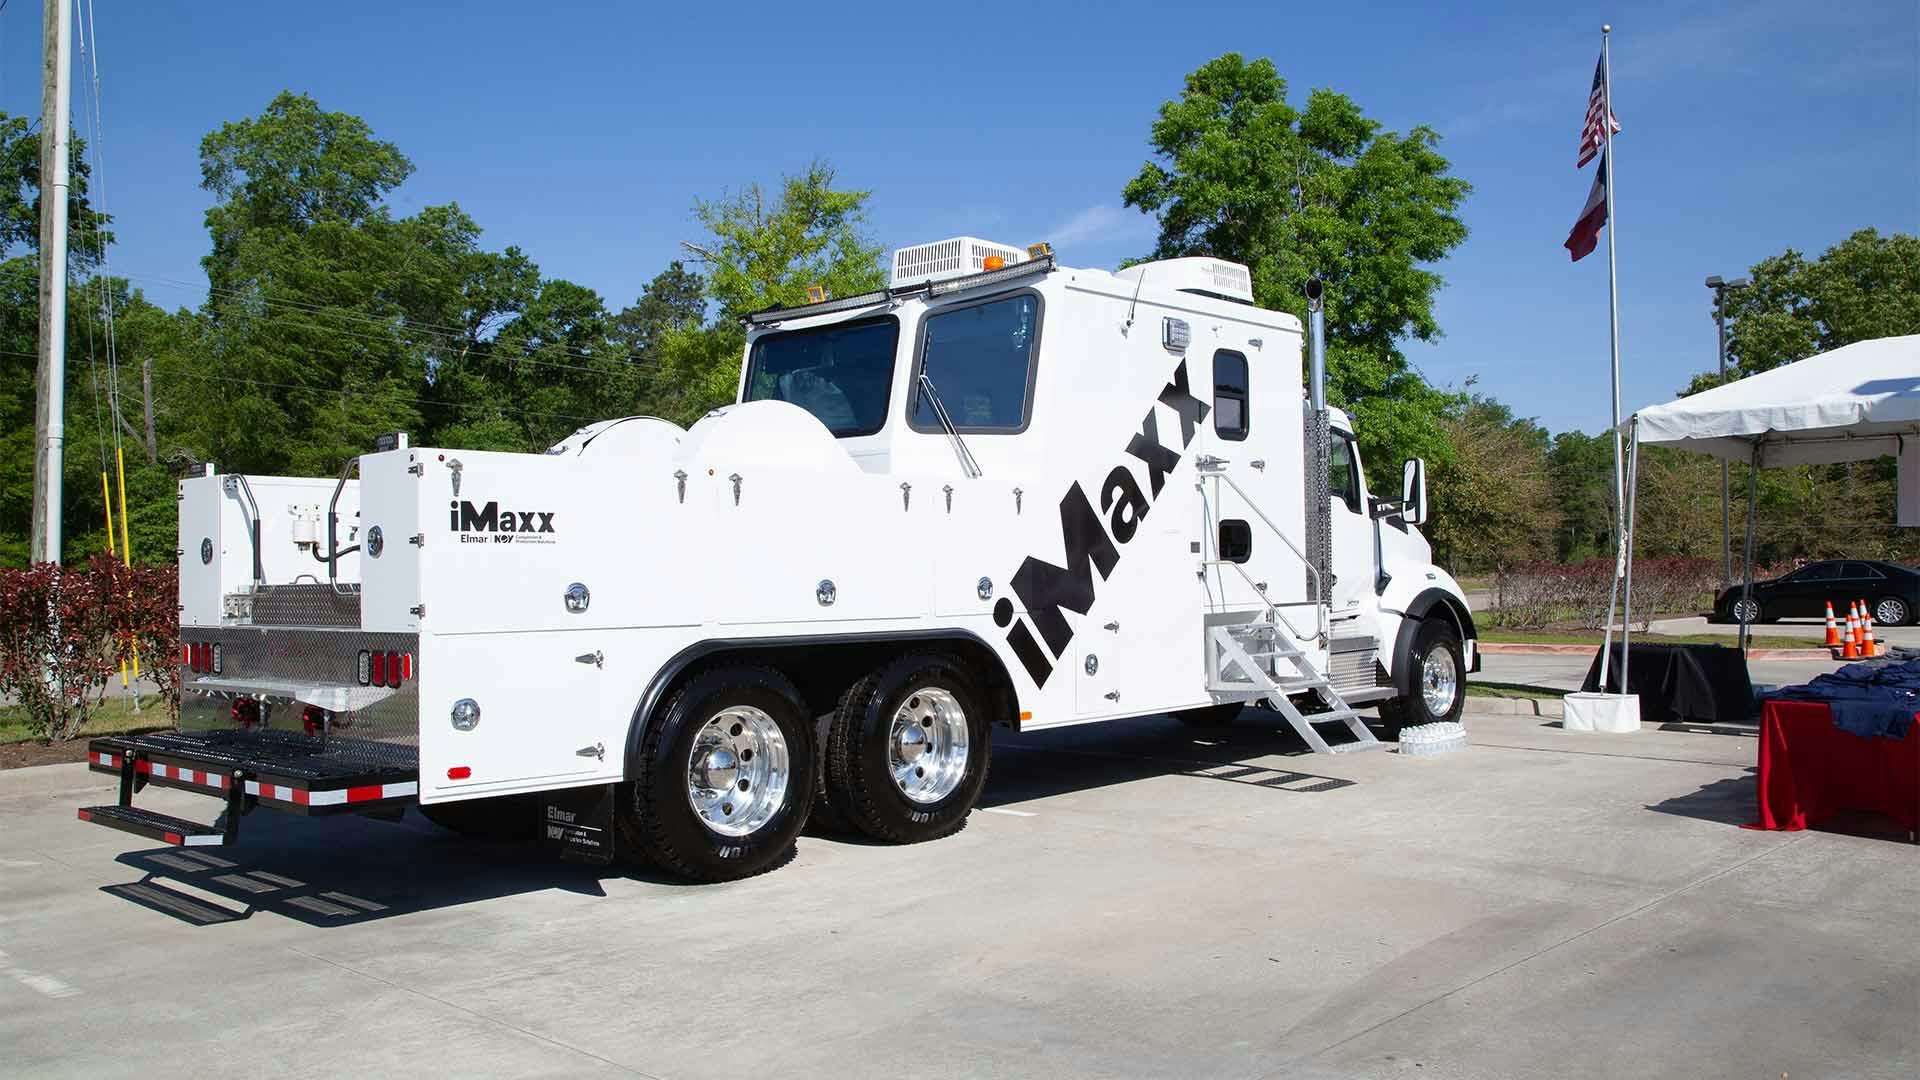 A back angle of an iMaxx series logging truck with an iMaxx logo decal